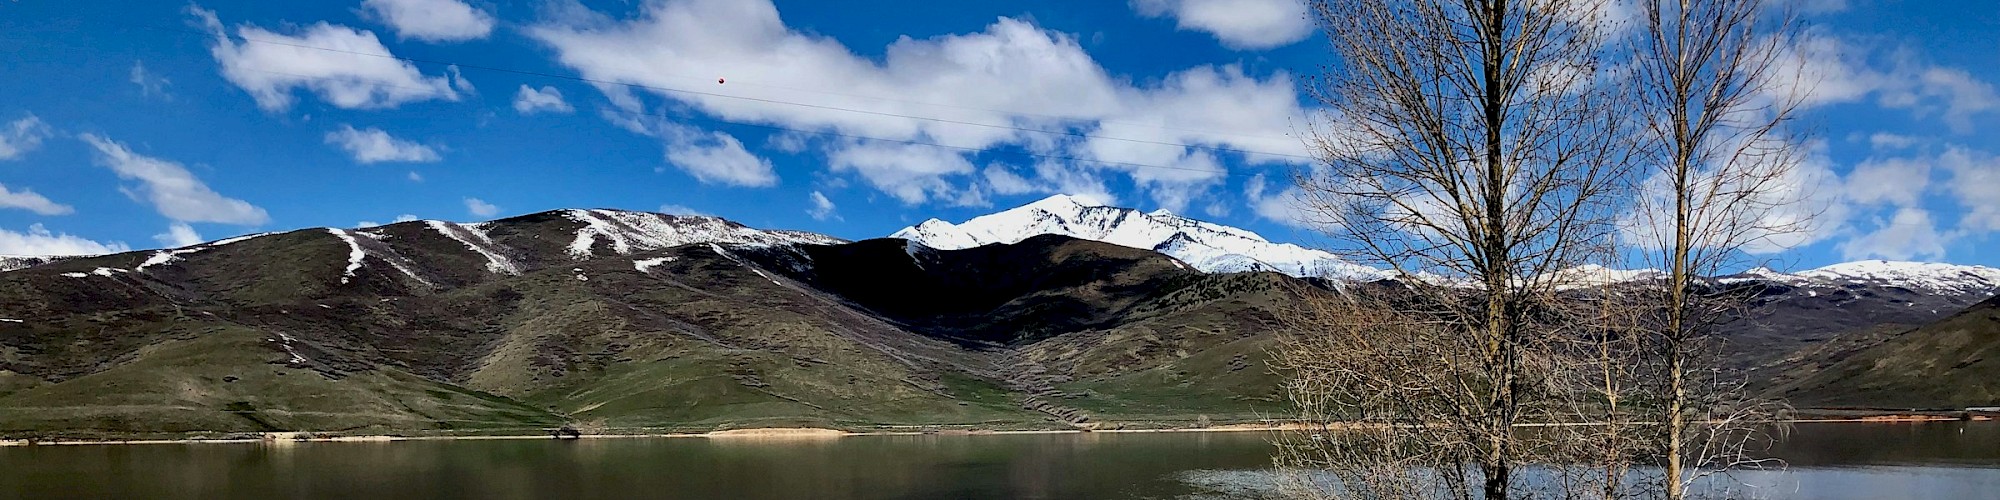 A serene lake with reflections, surrounded by snow-capped mountains, under a bright blue sky with scattered clouds.